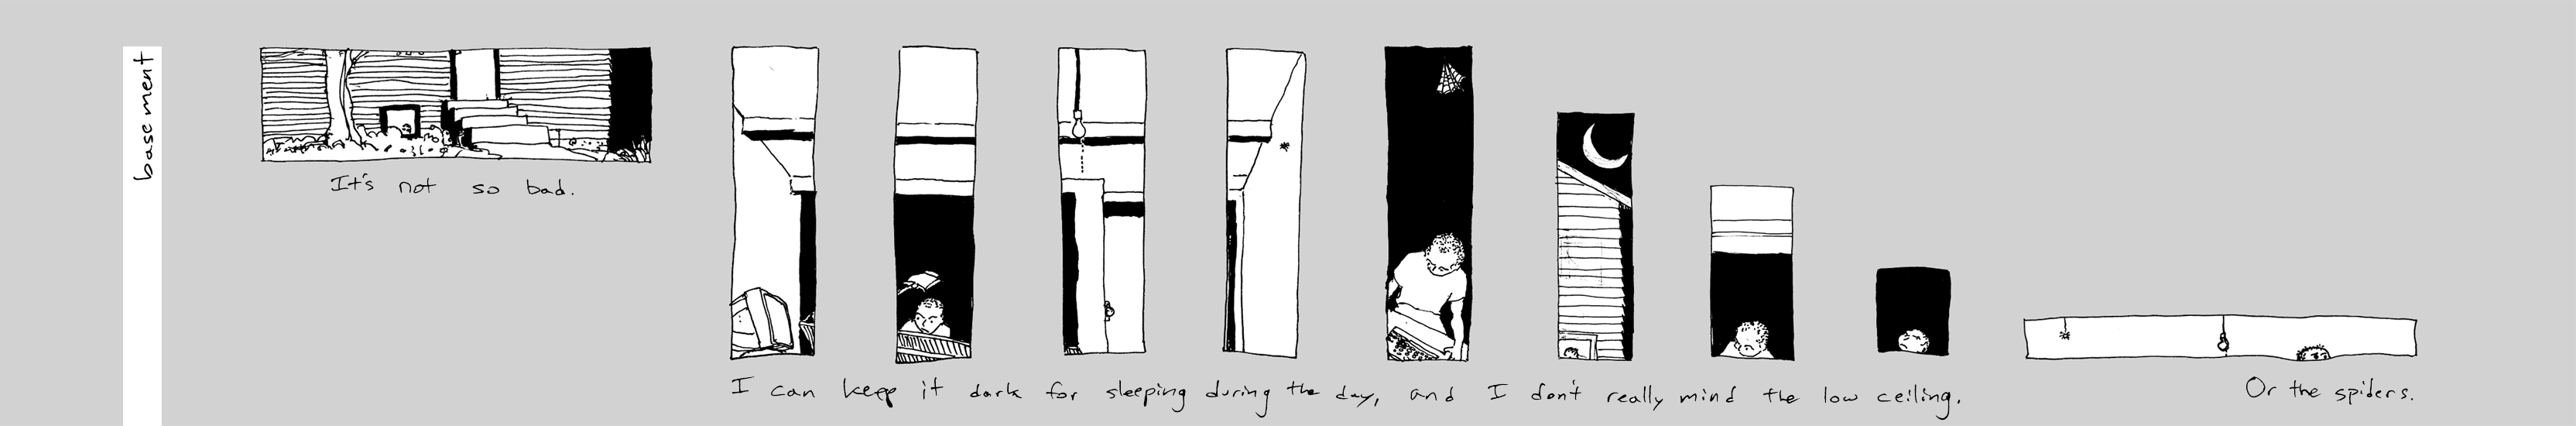 A comic about moving to a basement